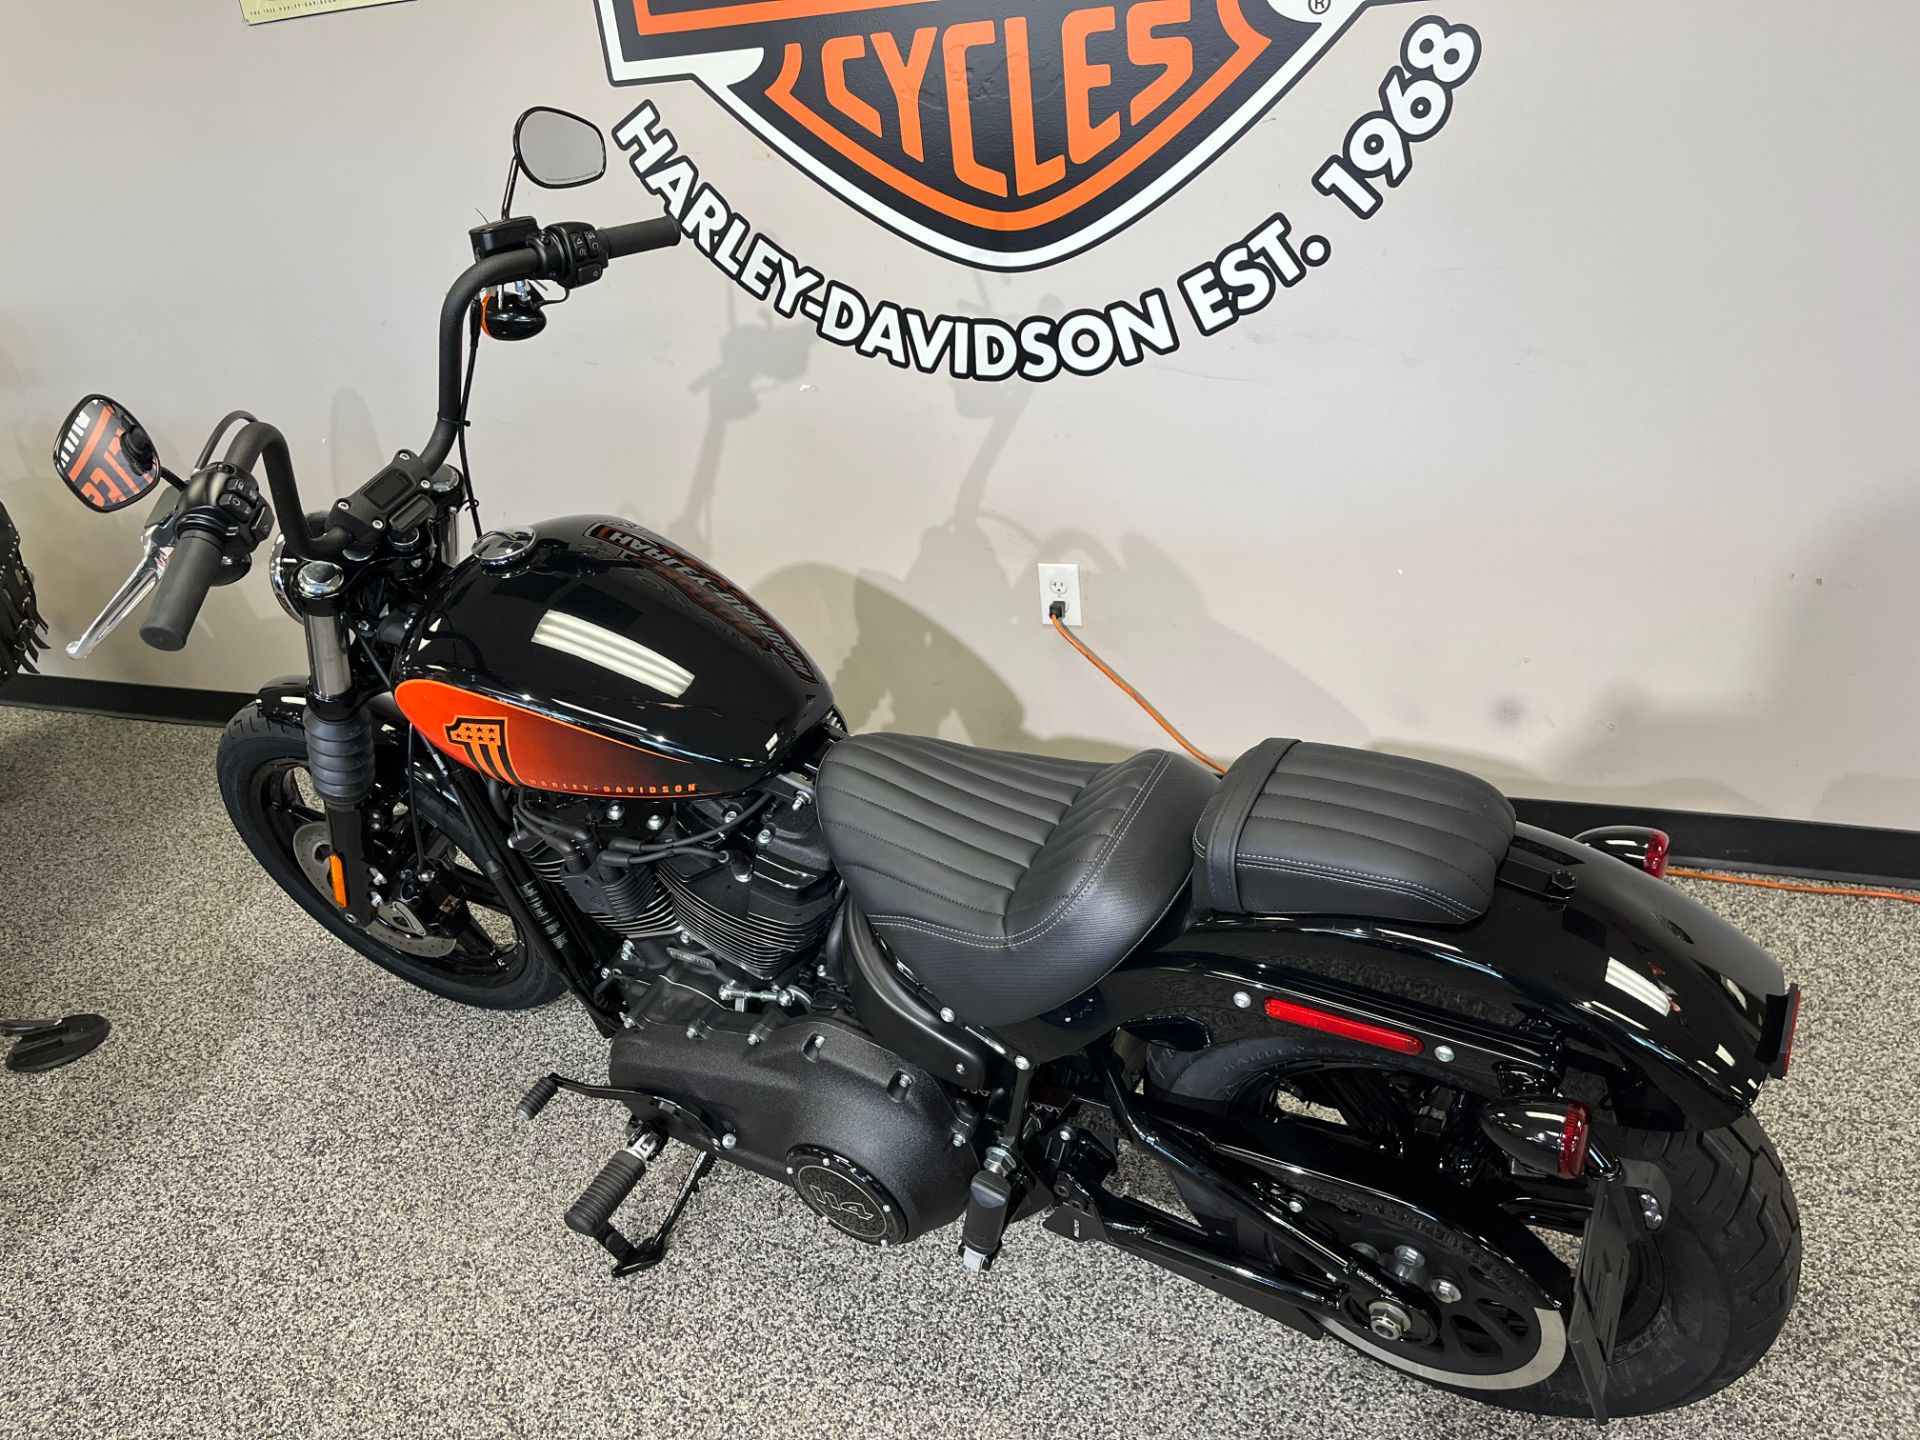 2022 Harley-Davidson Street Bob® 114 in Knoxville, Tennessee - Photo 9